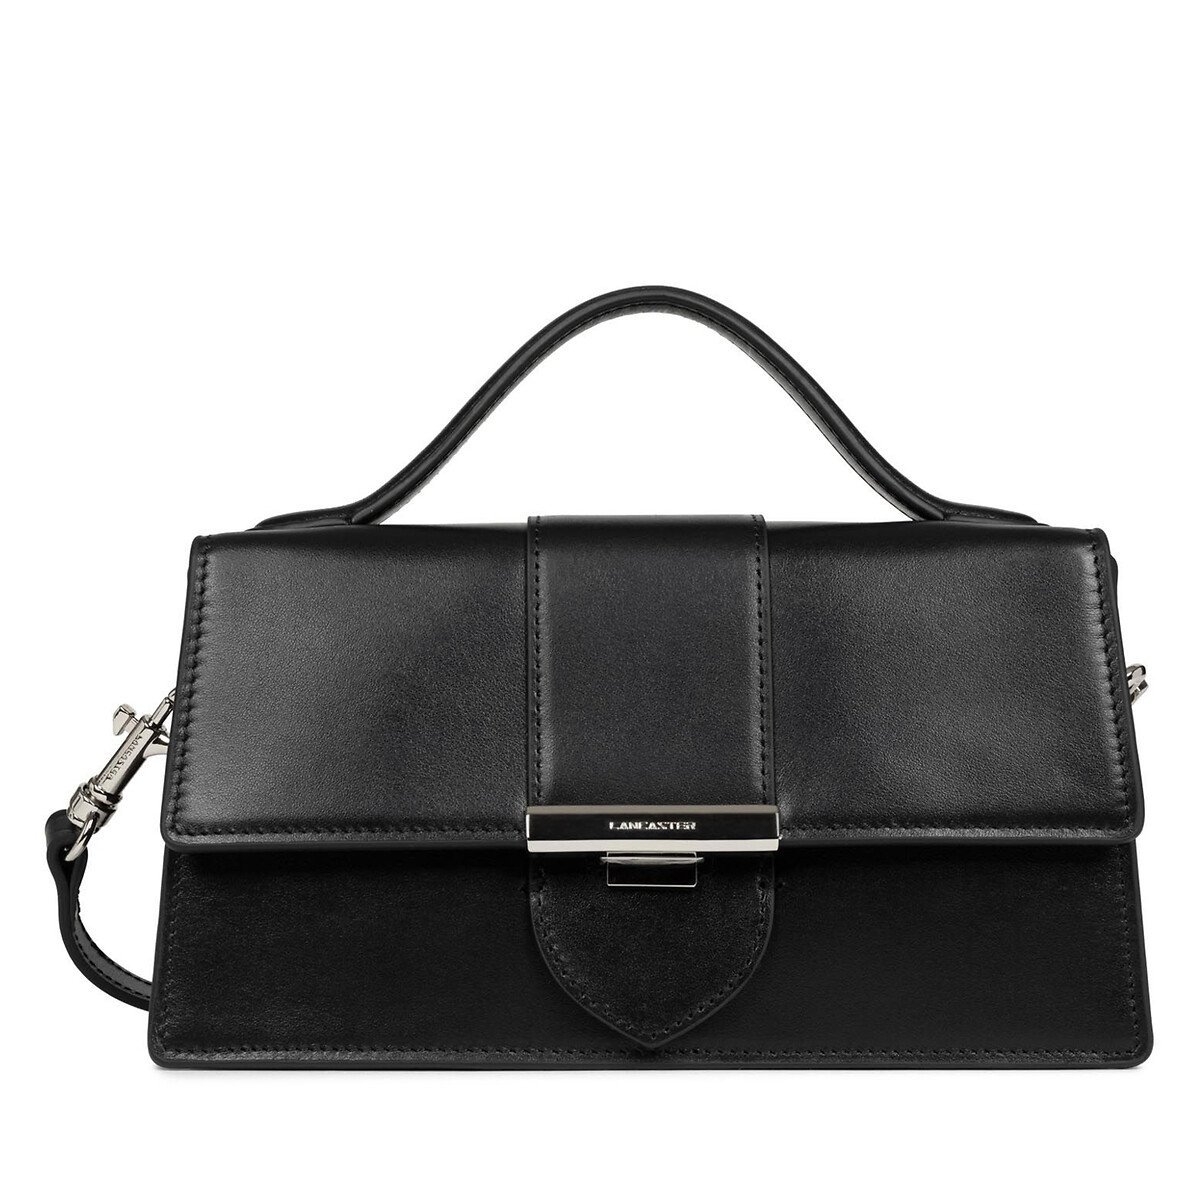 Image of Paris Ily Baguette Bag in Leather